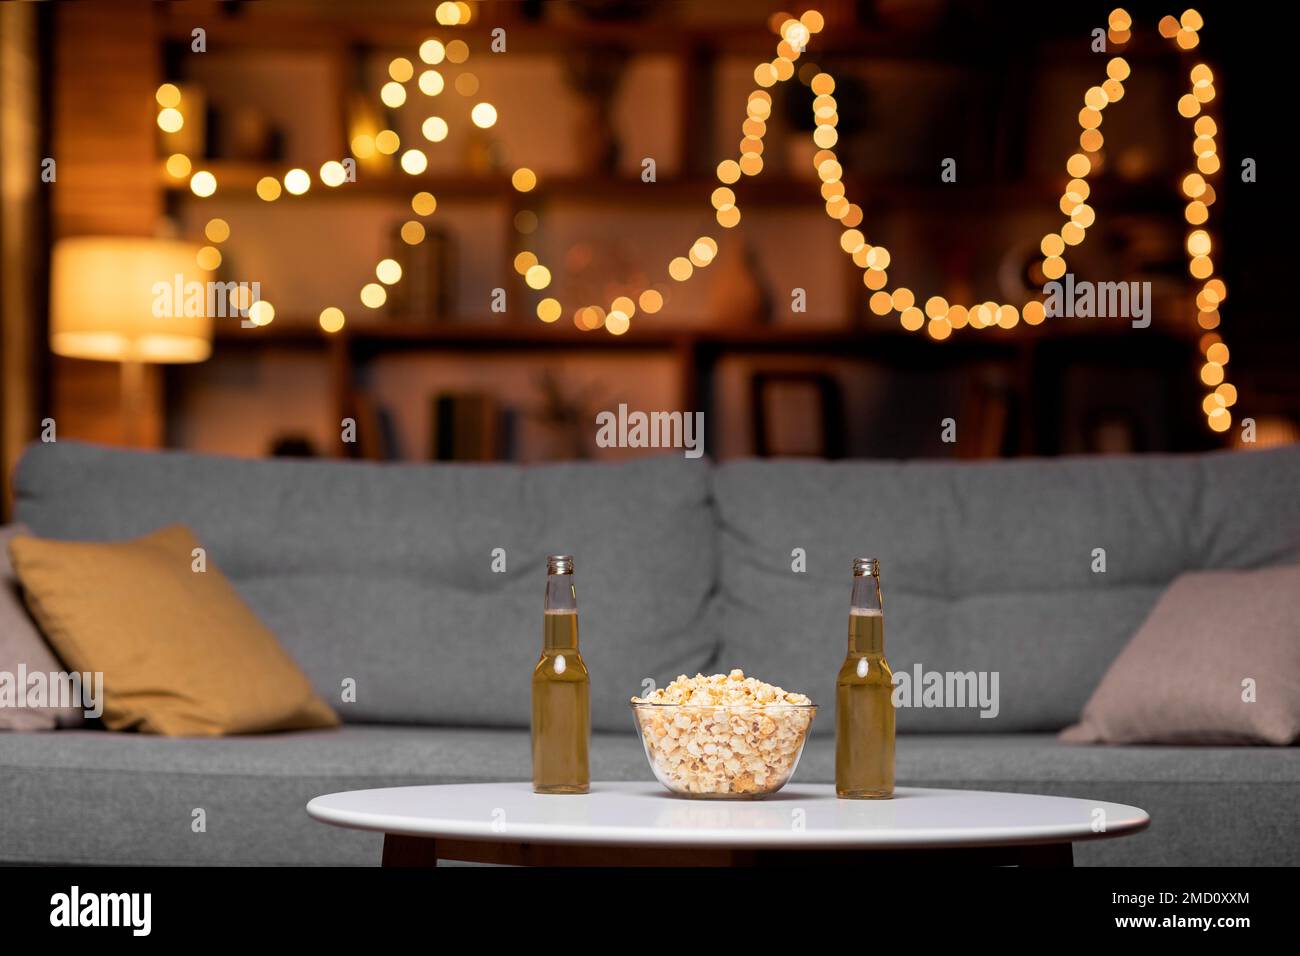 Glass bowl of popcorn and two bottles of beer Stock Photo